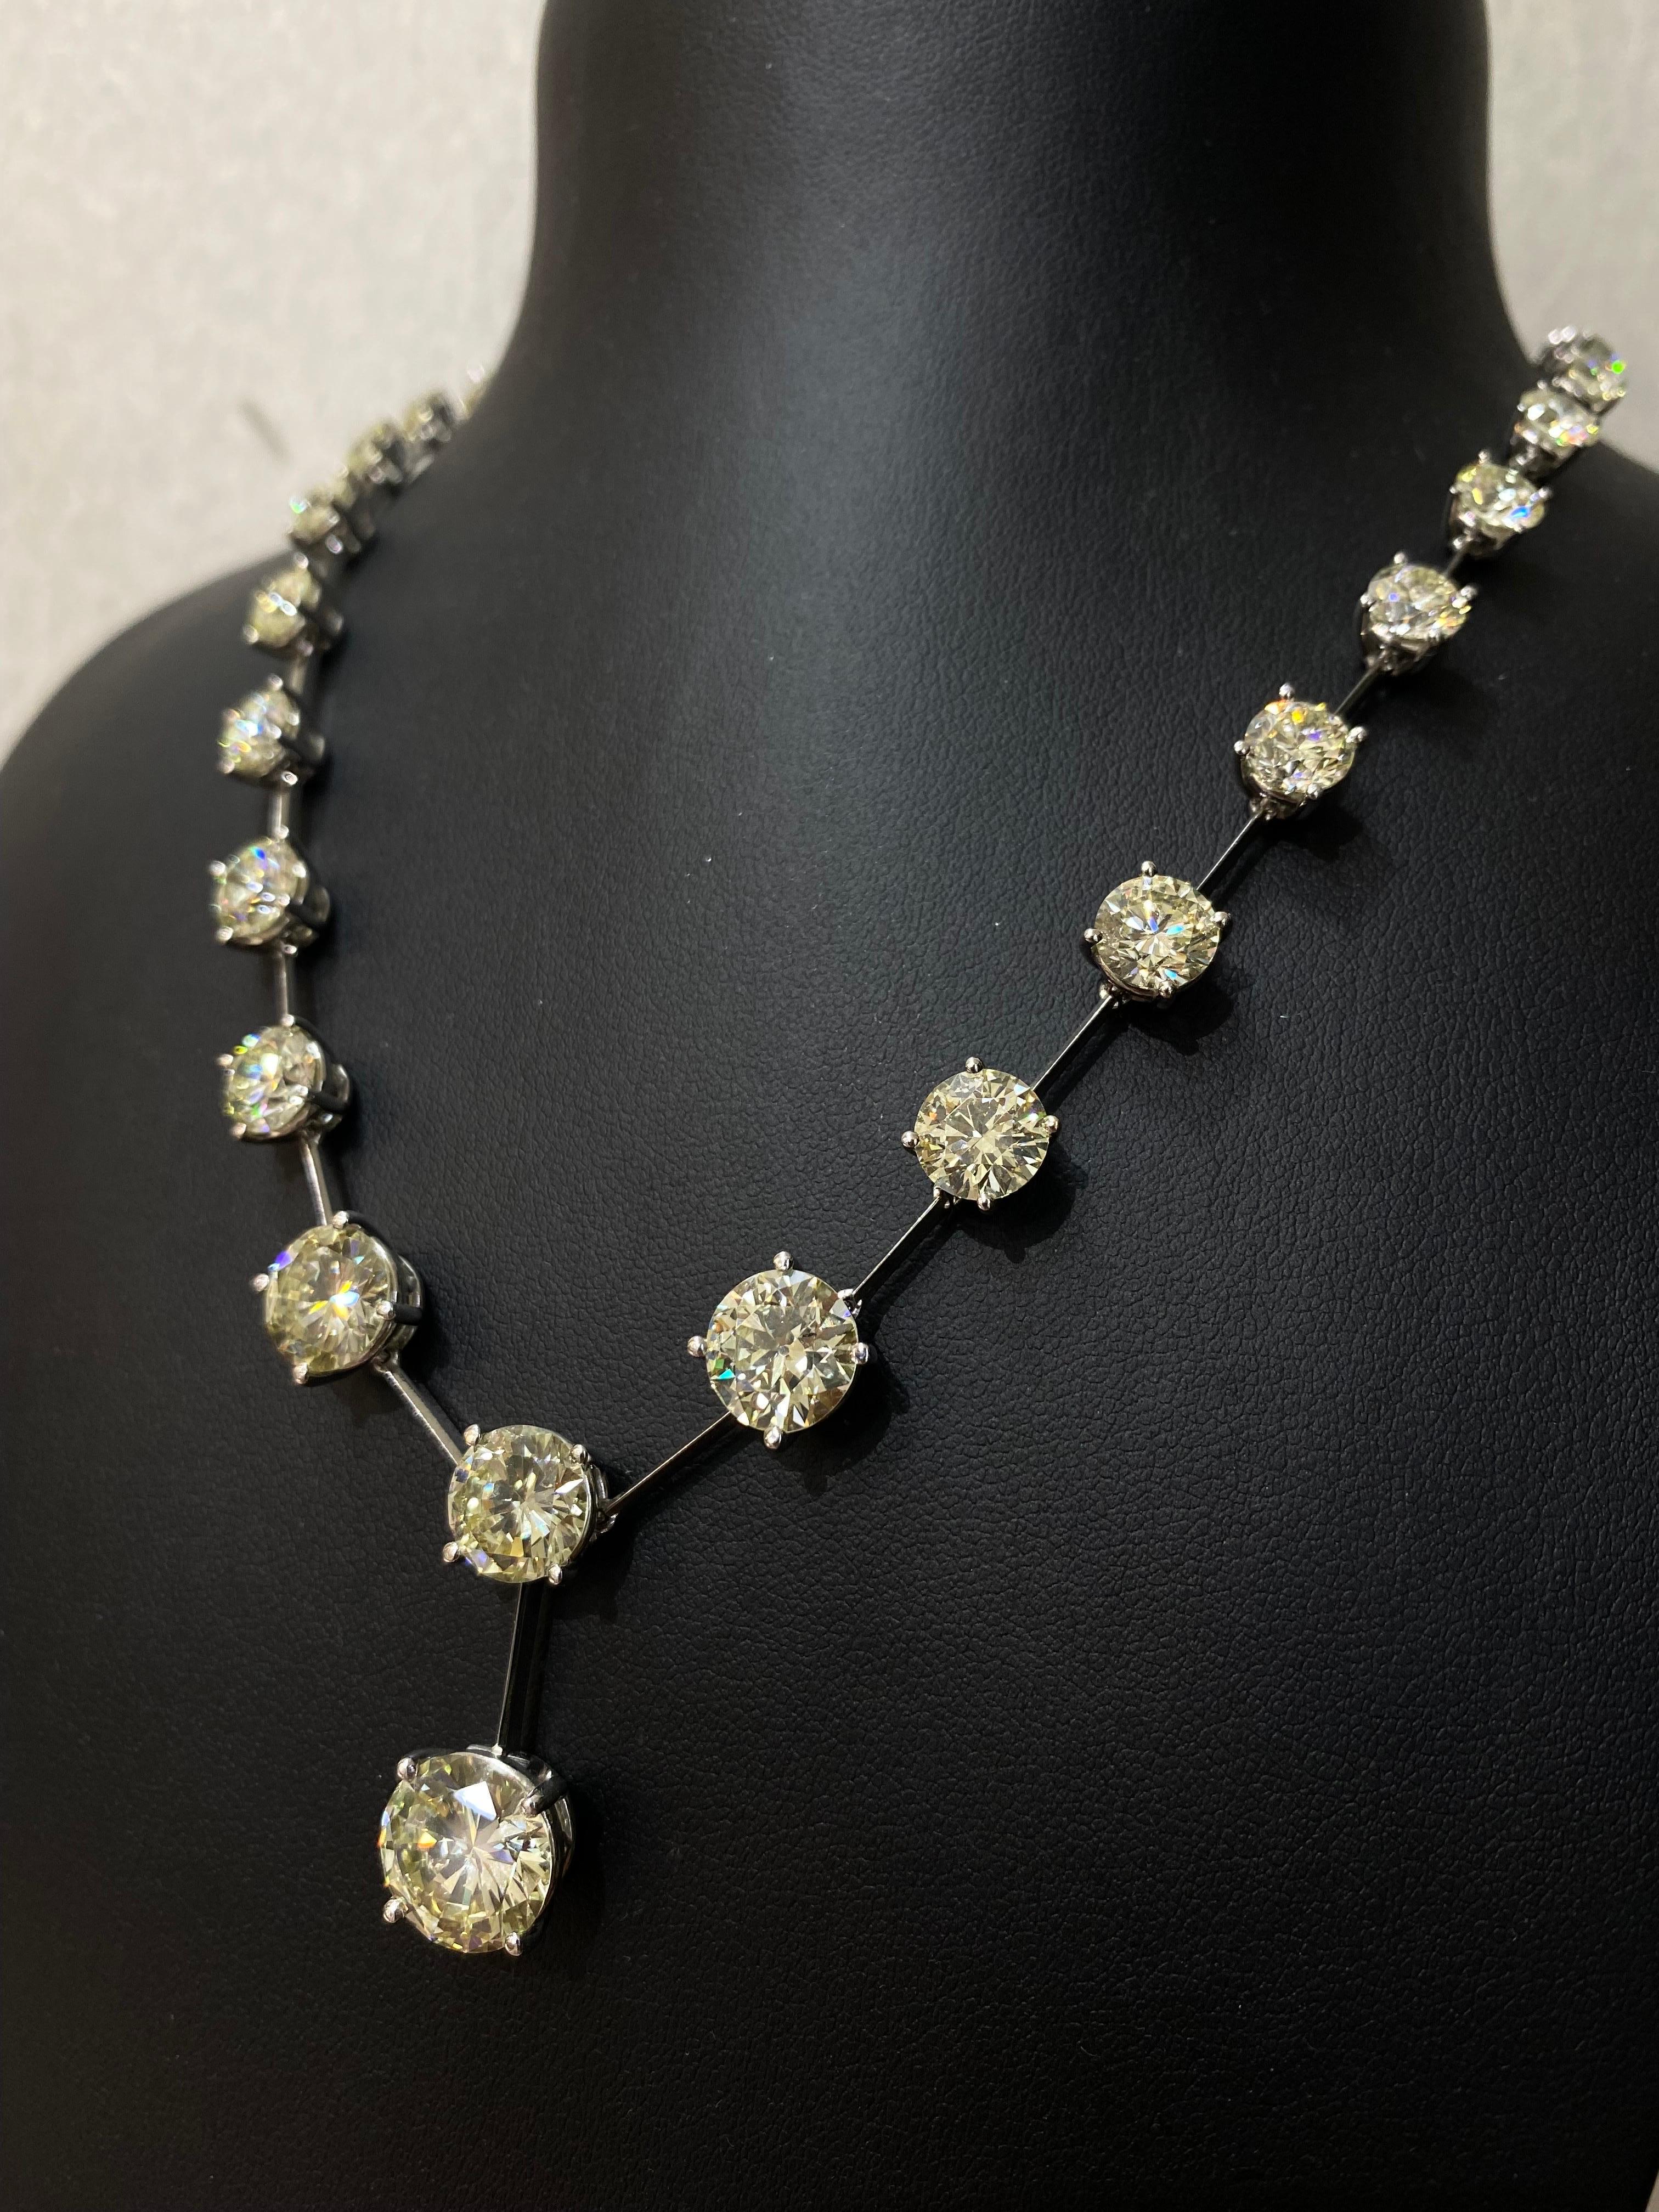 A one of a kind, 30.72 carat Diamond necklace, with single piece diamonds ranging from around 3.5 carat center stone to 0.3 carat. The clarity ranges from VVS-VS, K/L color and each stone has a brilliant luster. The necklace truly makes a statement,